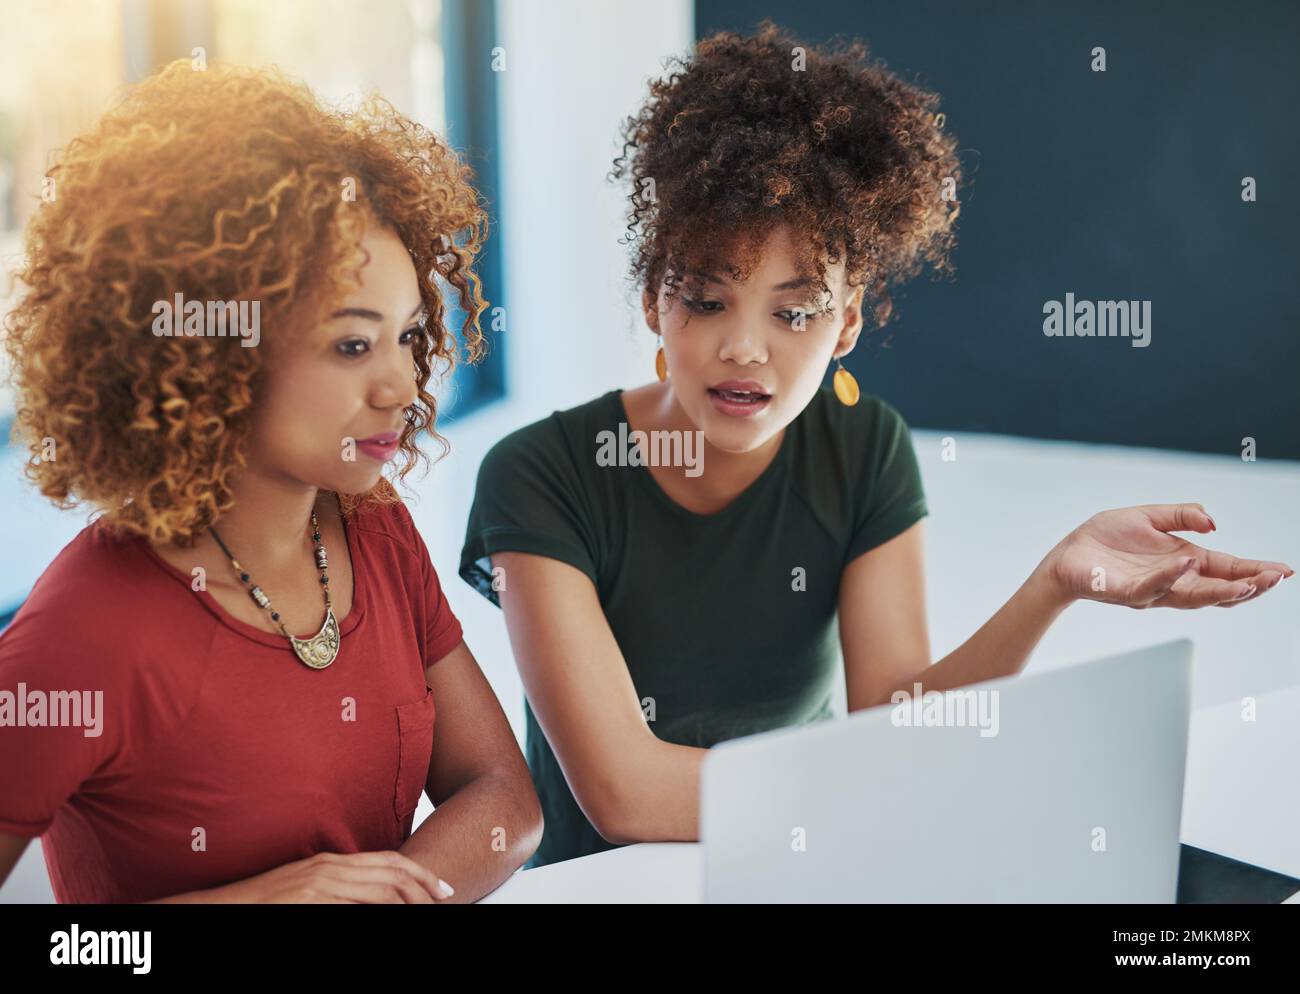 Theyve got the need to succeed. two young designers working on a laptop together. Stock Photo